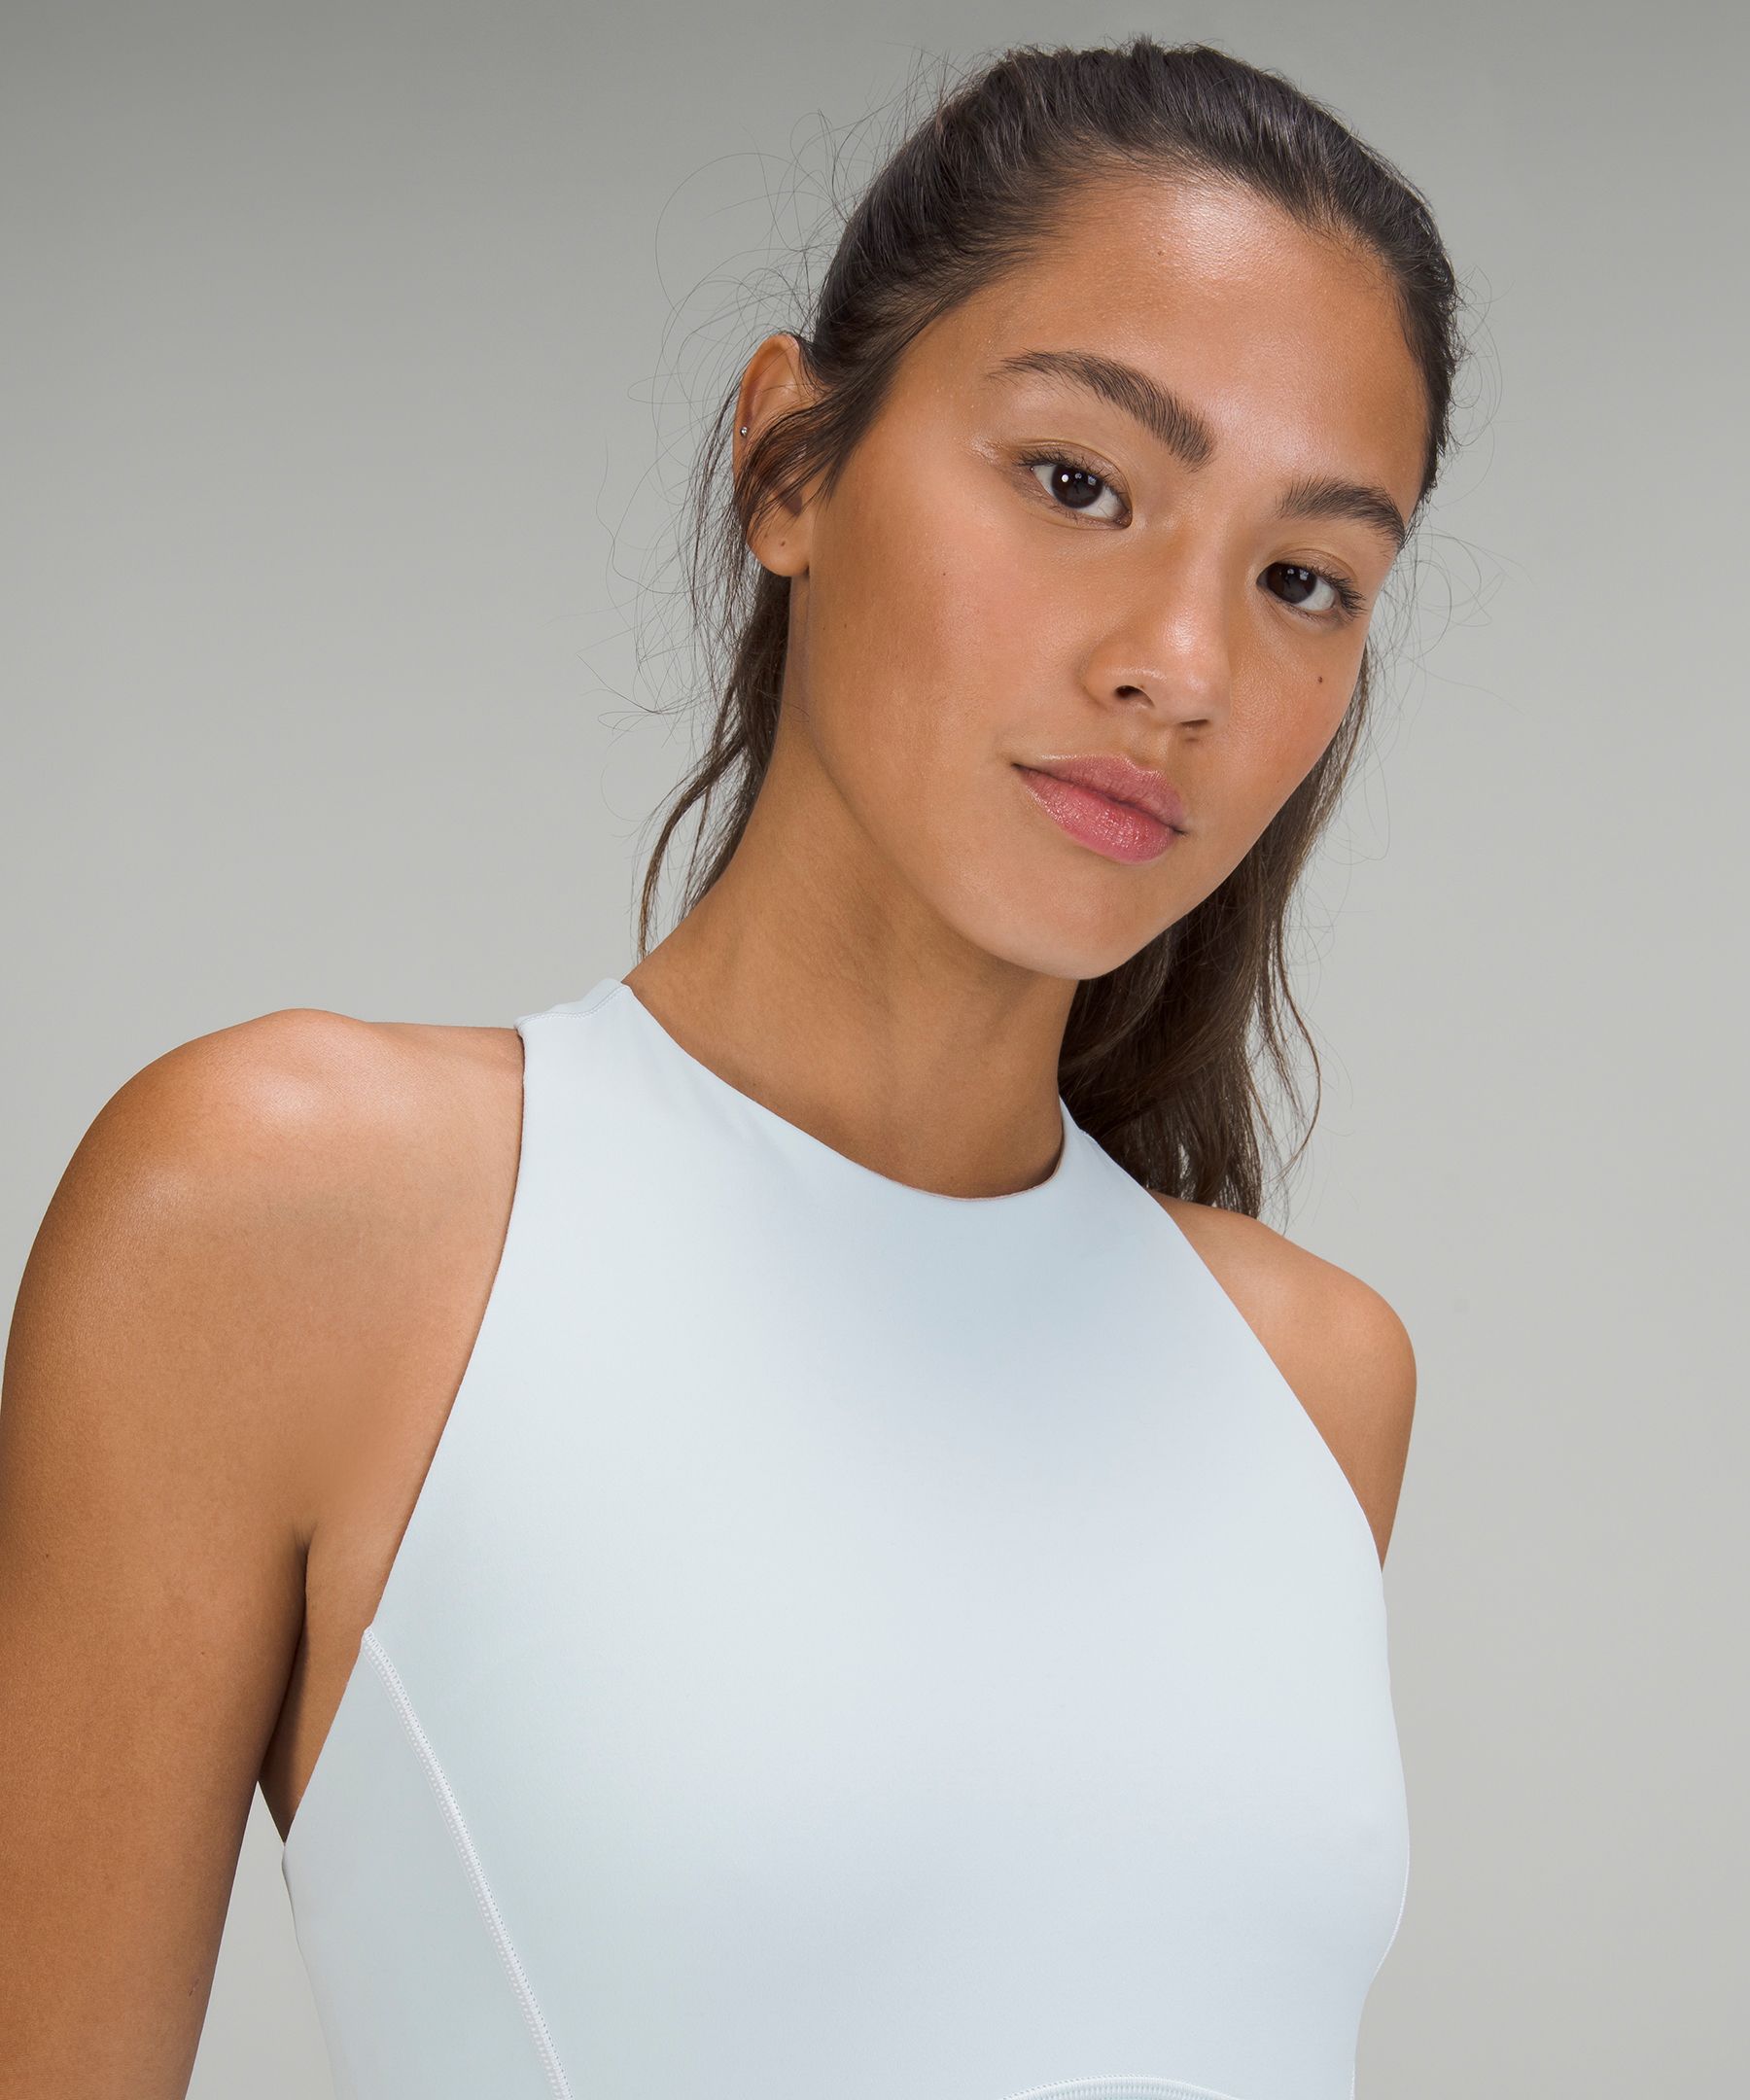 Lululemon white tennis dress: get it NOW, Gallery posted by gisele rei!